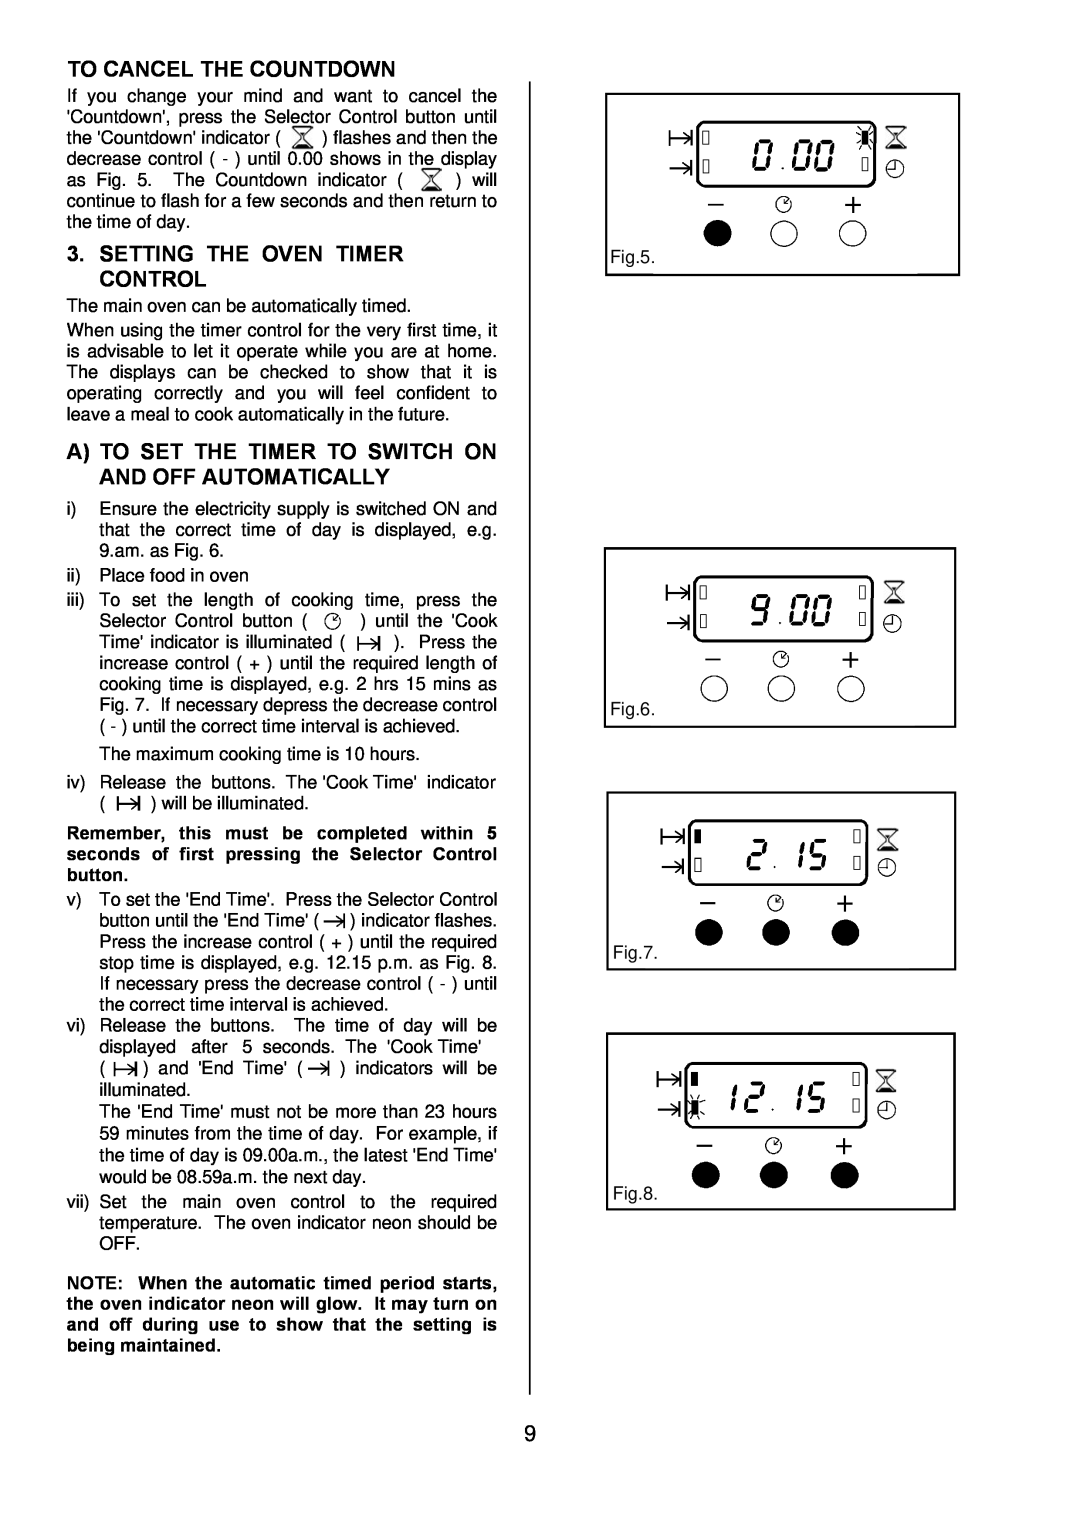 Zanussi ZOD 890 manual To Cancel The Countdown, Setting The Oven Timer Control 